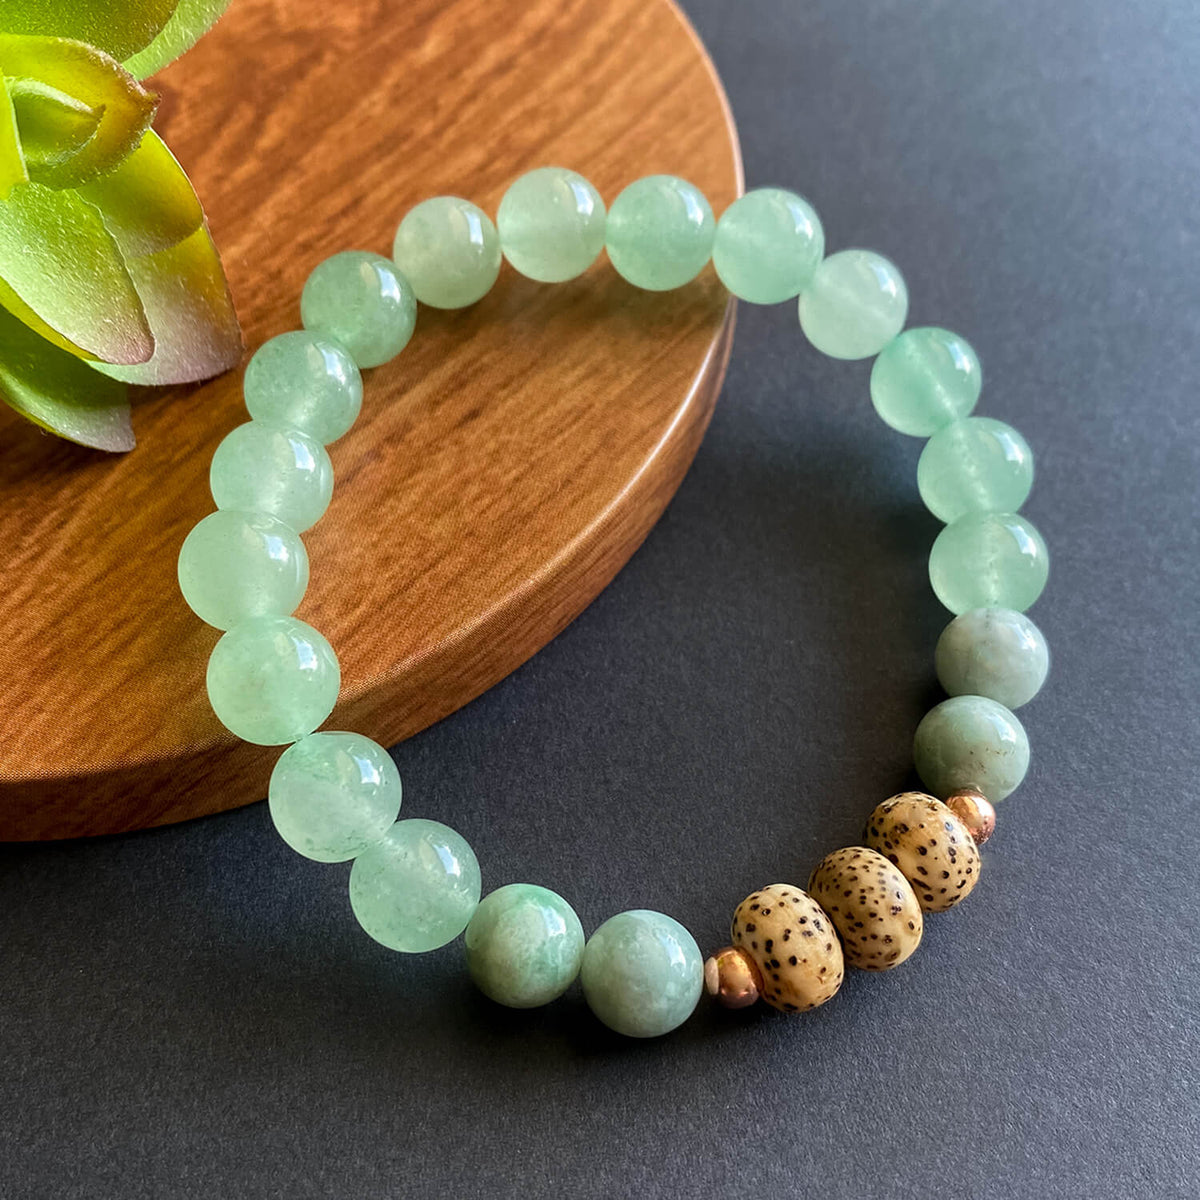 How to Choose a Mala (8 Different Ways!)